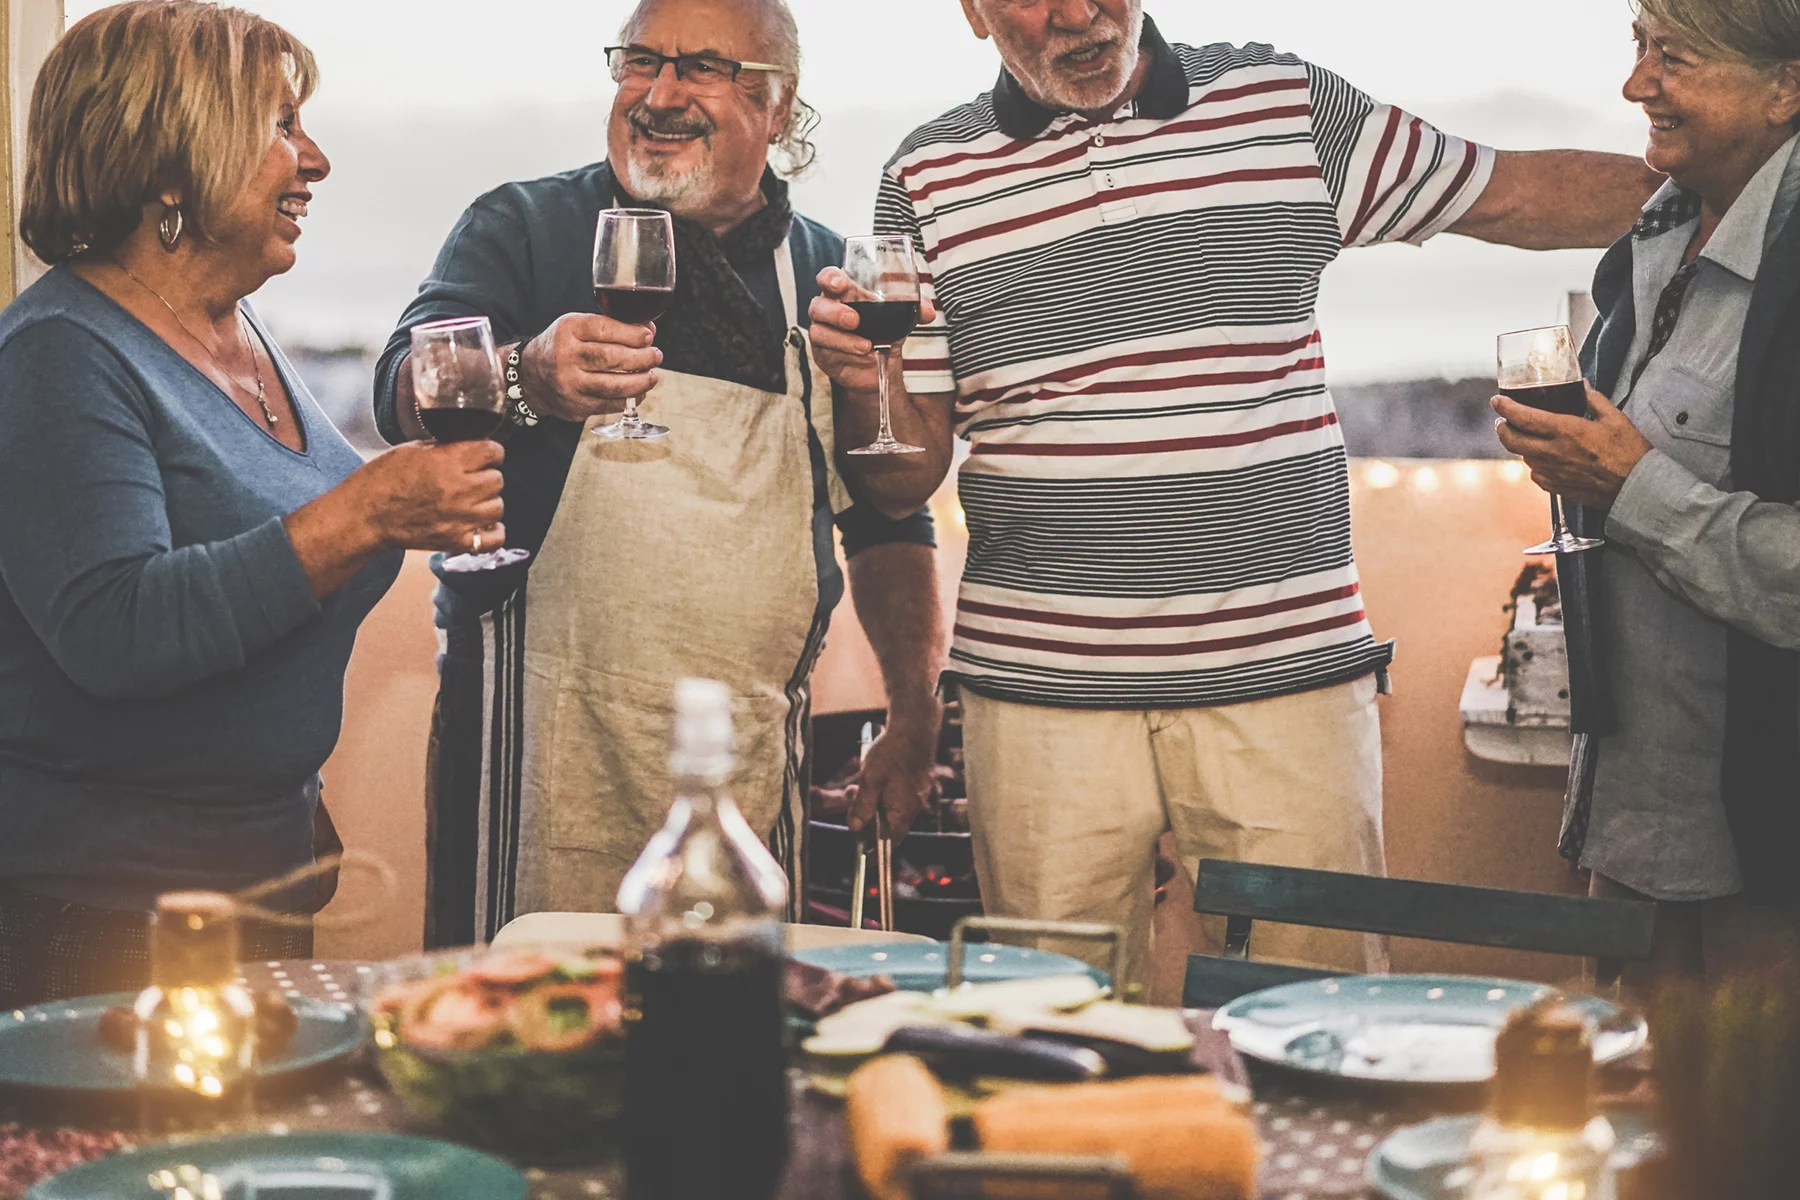 A group of pensioners in Spain drinking wine